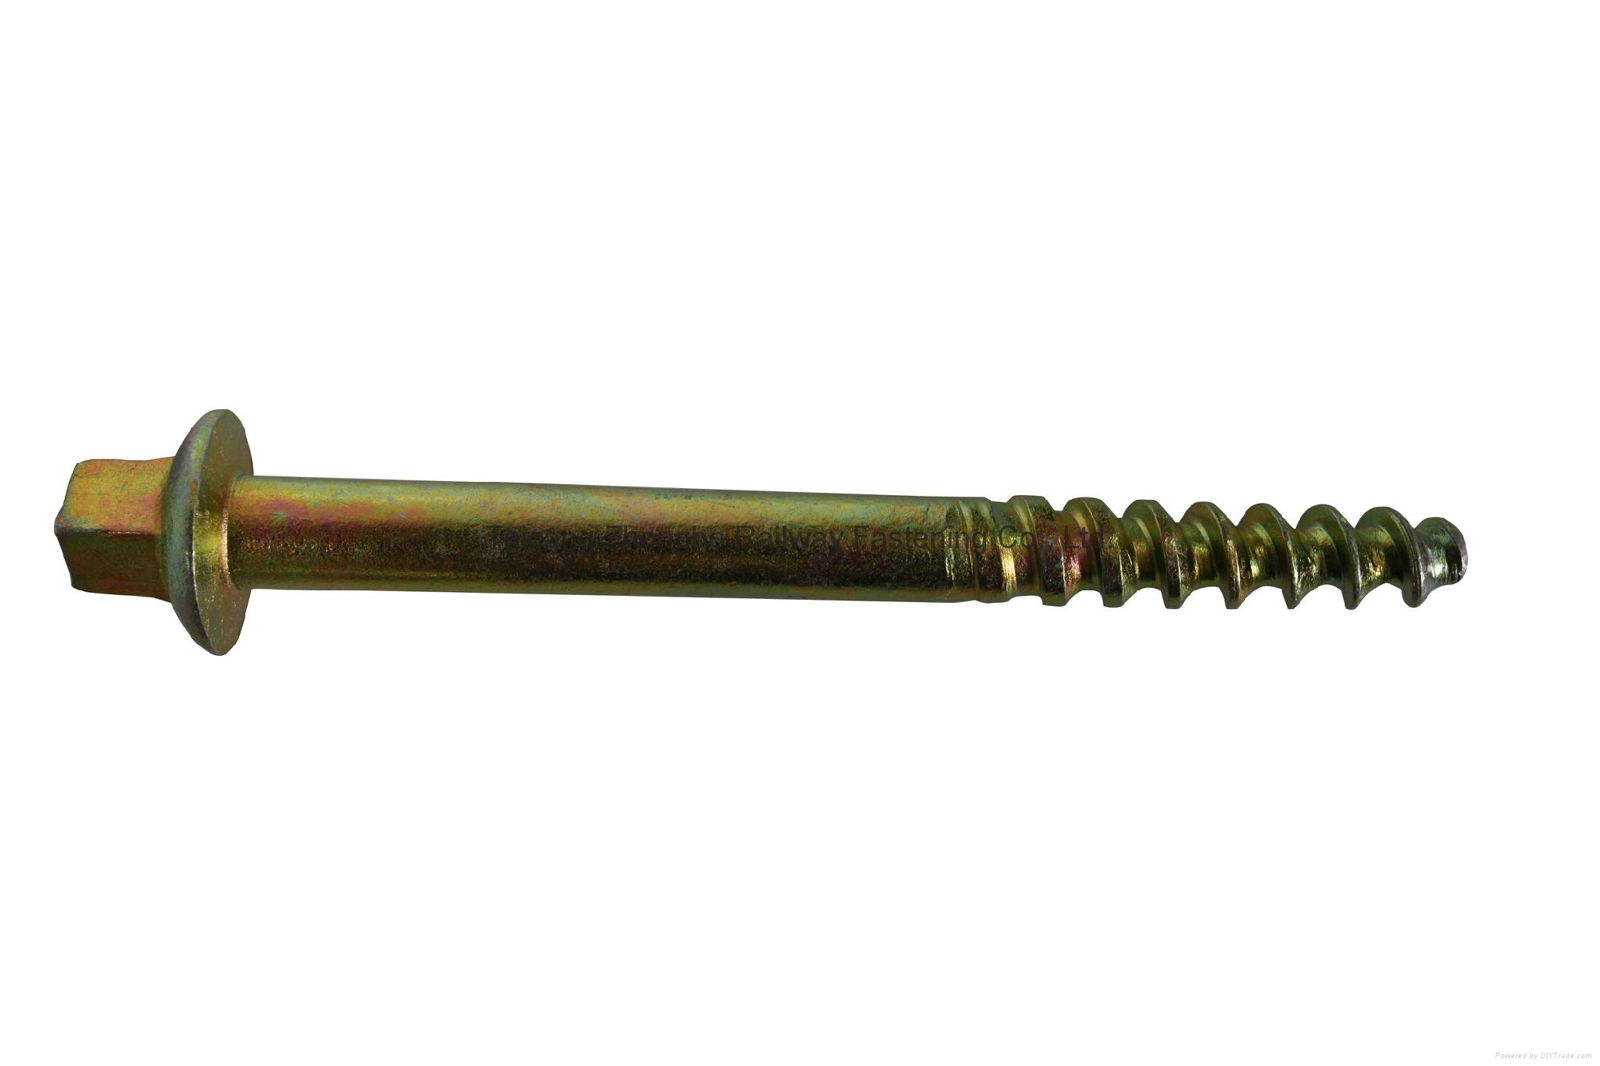 Screw spikes used in tie plates 2